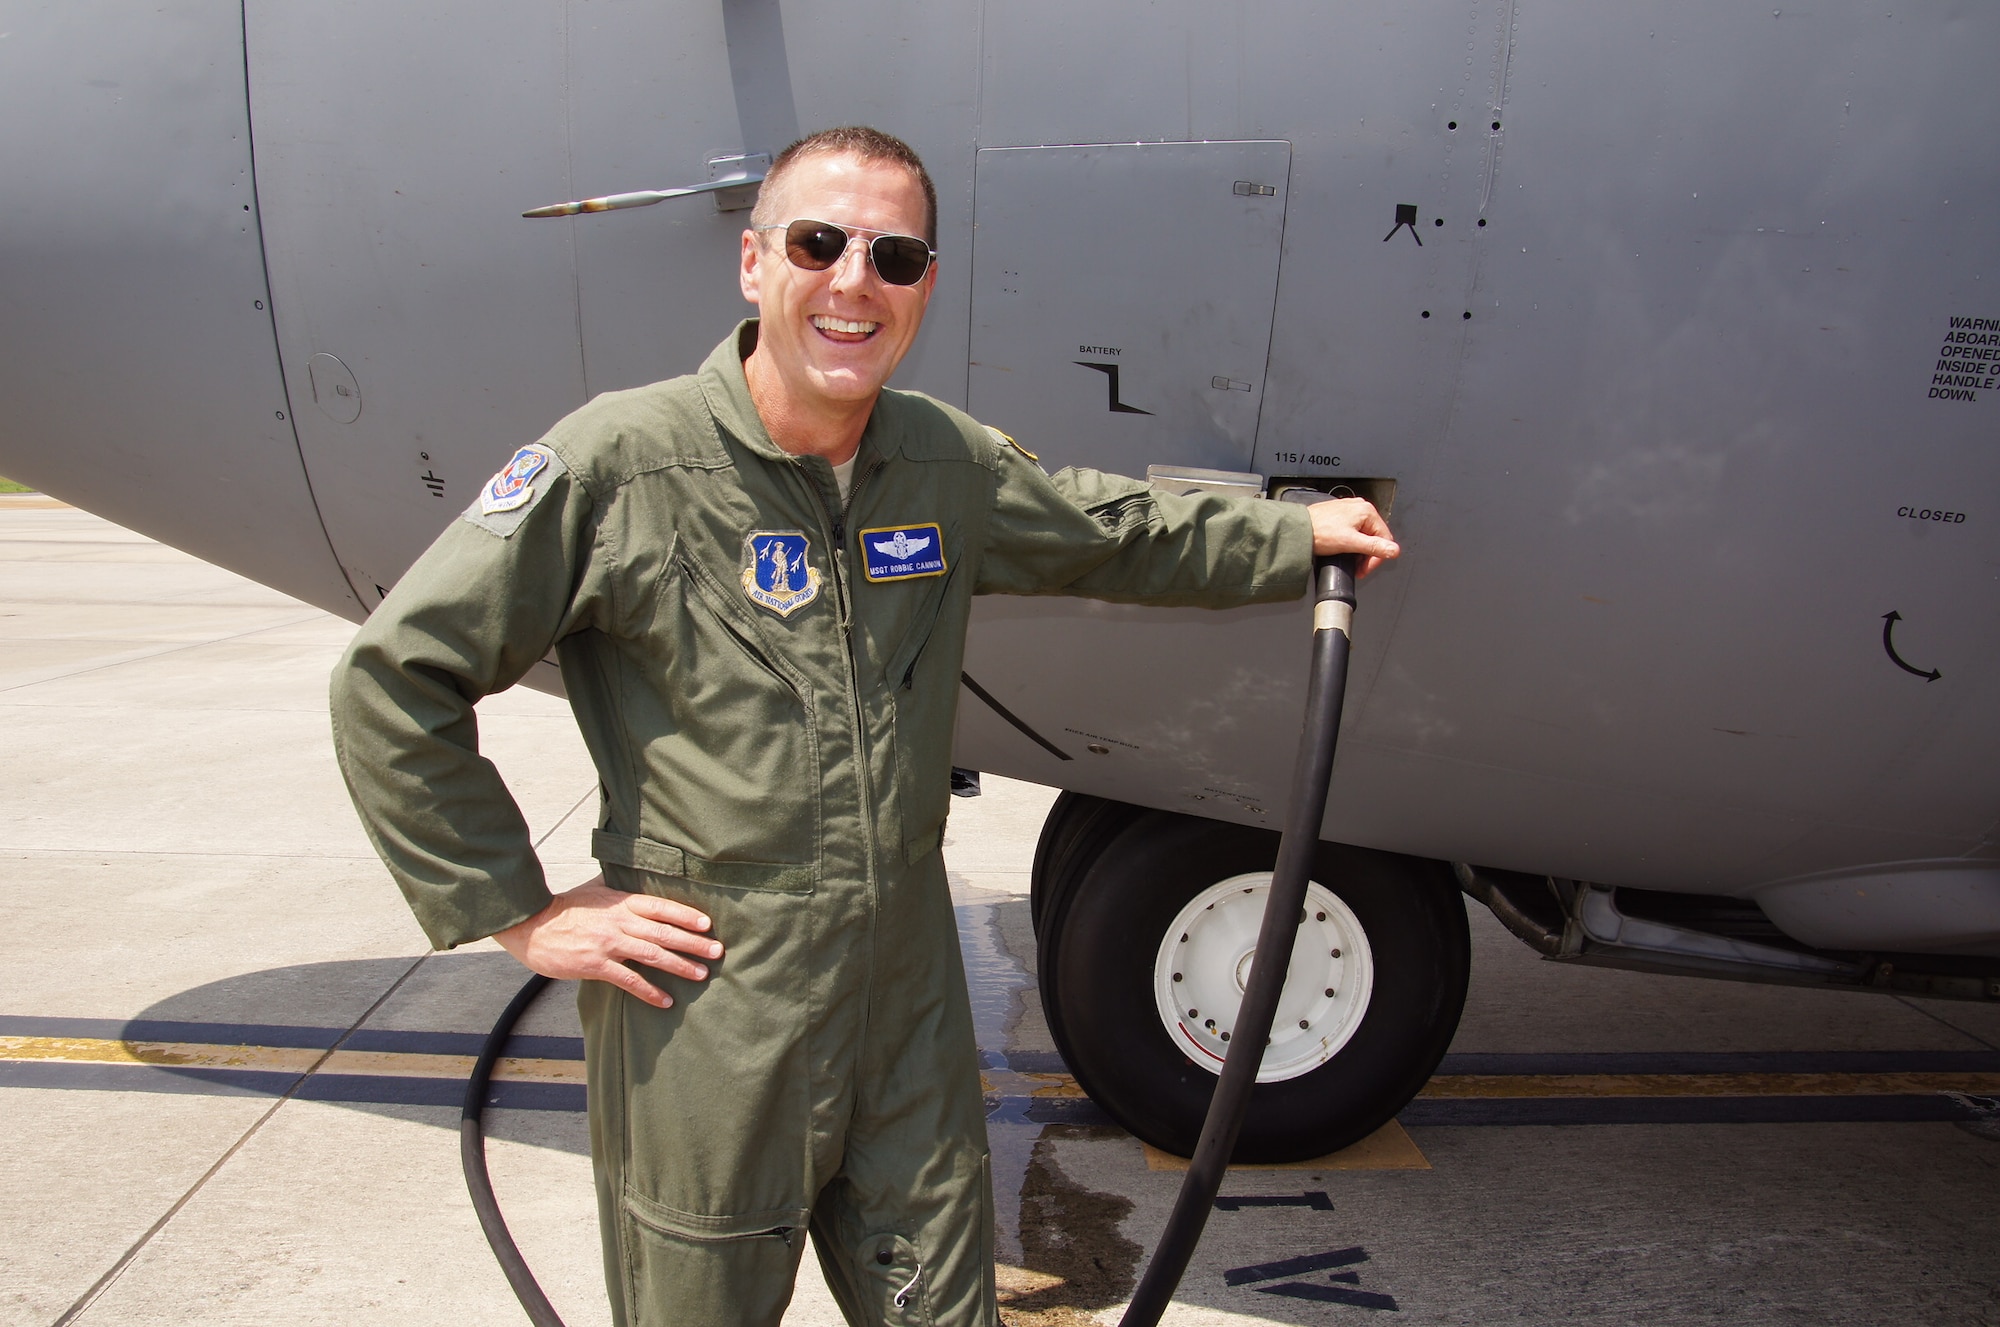 C-130 engineer Senior Master Sgt. Robert S. Cannon, one of 4 crew members who were killed July 1, 2012 after their C-130 crashed while fighting wildfires in South Dakota. (courtesy photo)
